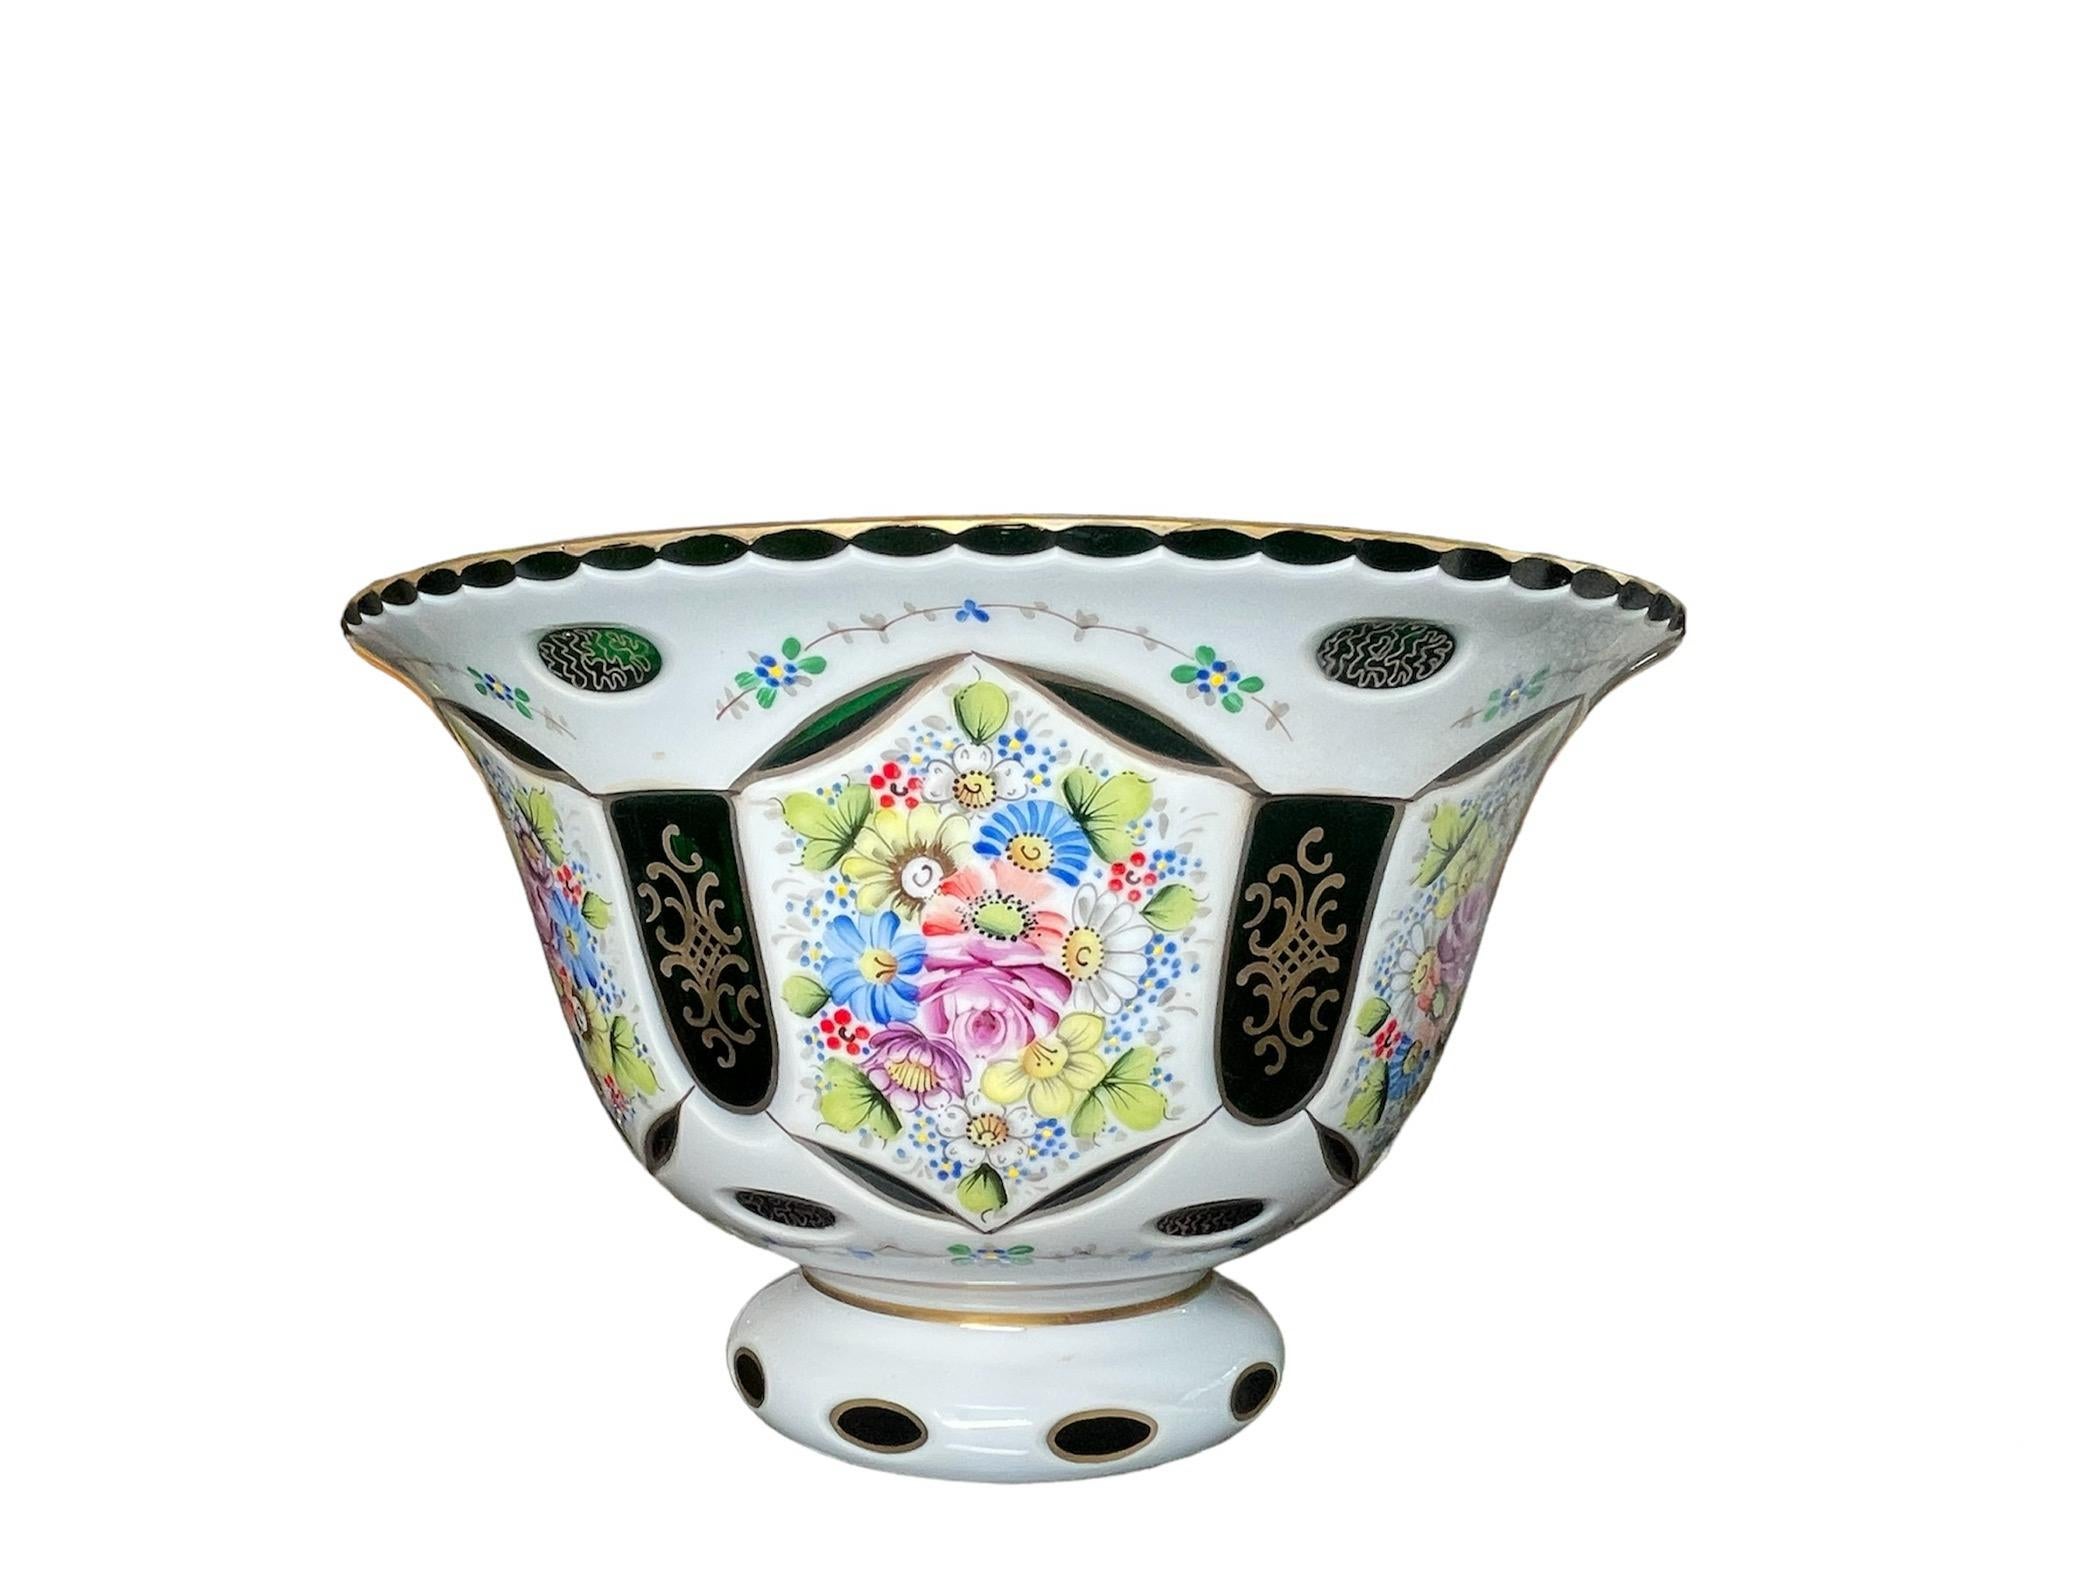 This is a Czech Bohemian White Cut to Green Glass Hand Painted Vase. It depicts an upside down bell shaped white cut to green glass vase decorated with bouquets of flowers all around. The green glass is also adorned with a gilt scrolls patterns.